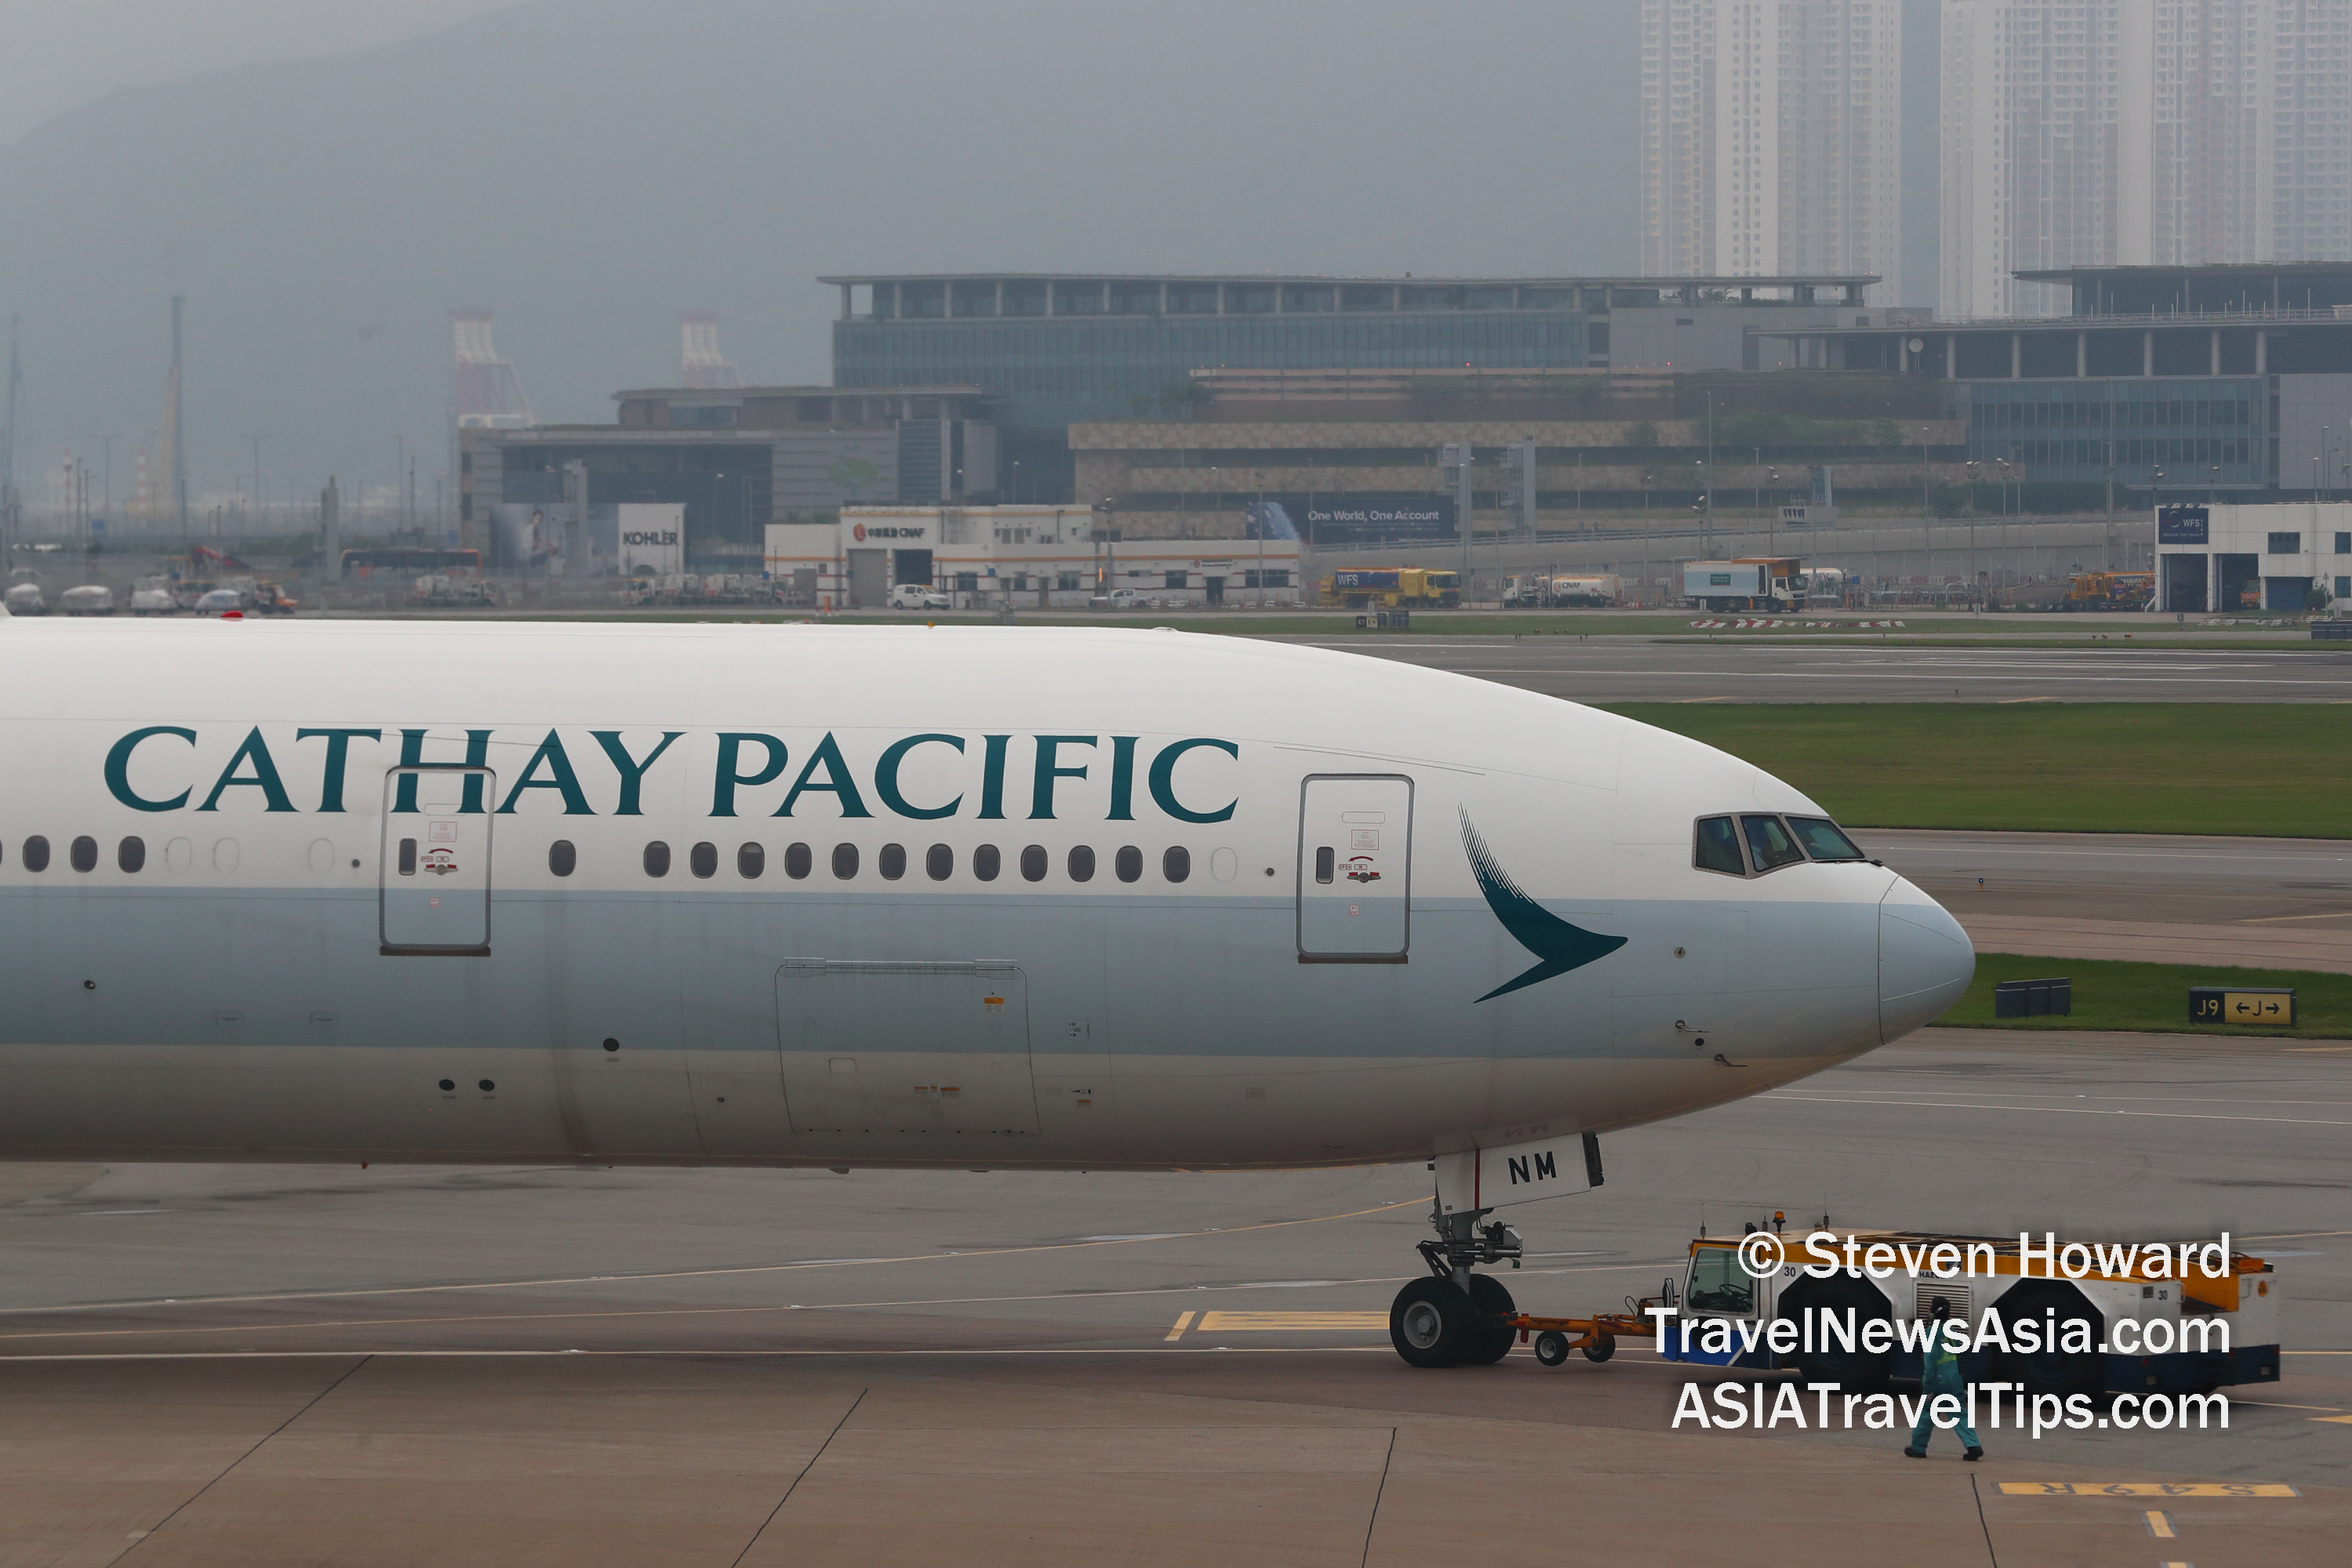 Cathay Pacific Boeing 777-300 B-HNM. Picture by Steven Howard of TravelNewsAsia.com Click to enlarge.